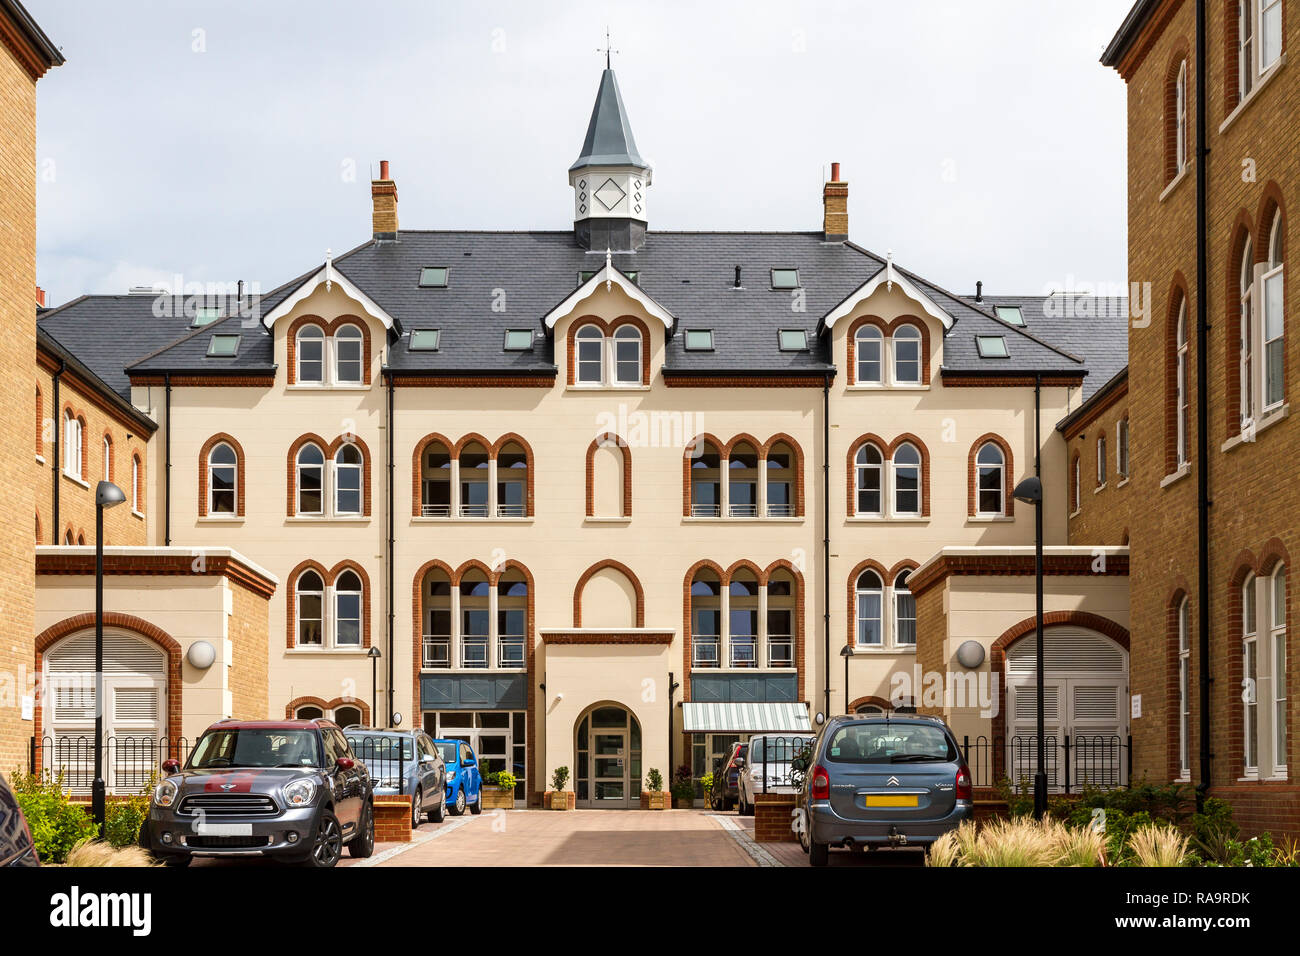 St. George's Retirement Home. Insulated and Rendered by Weber/St. Gobain Stock Photo